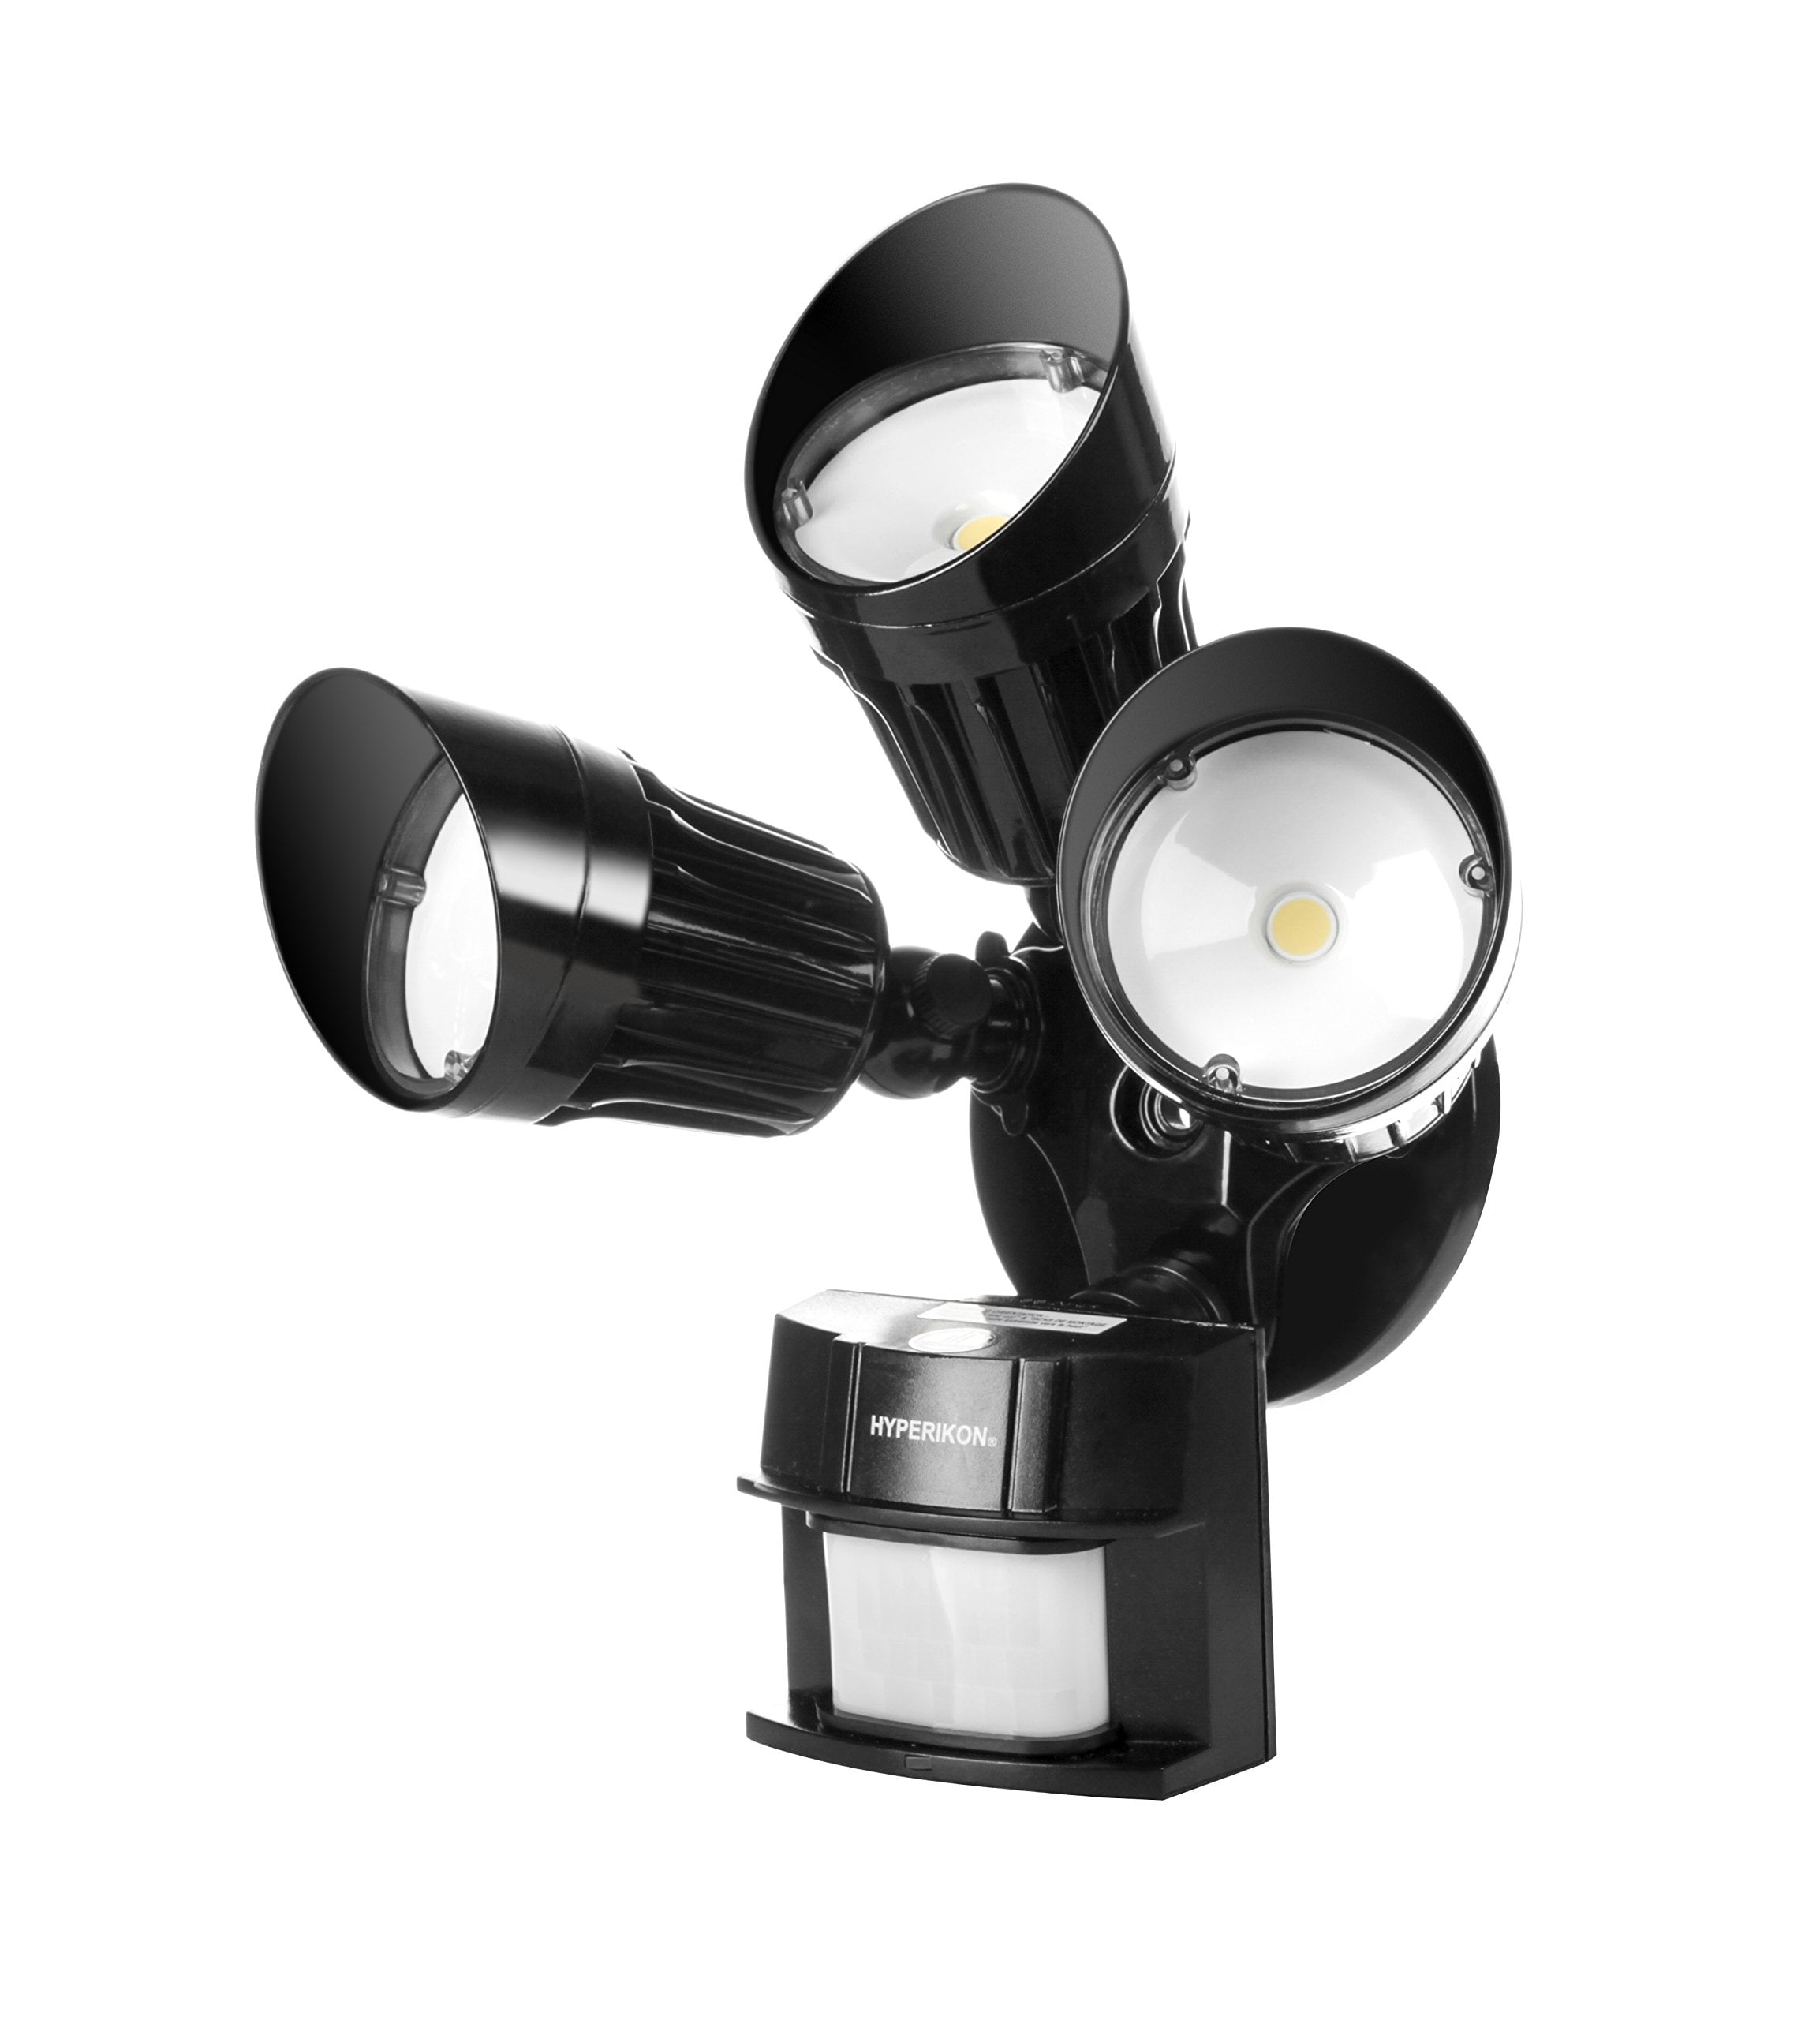 Are LED security lights any good?